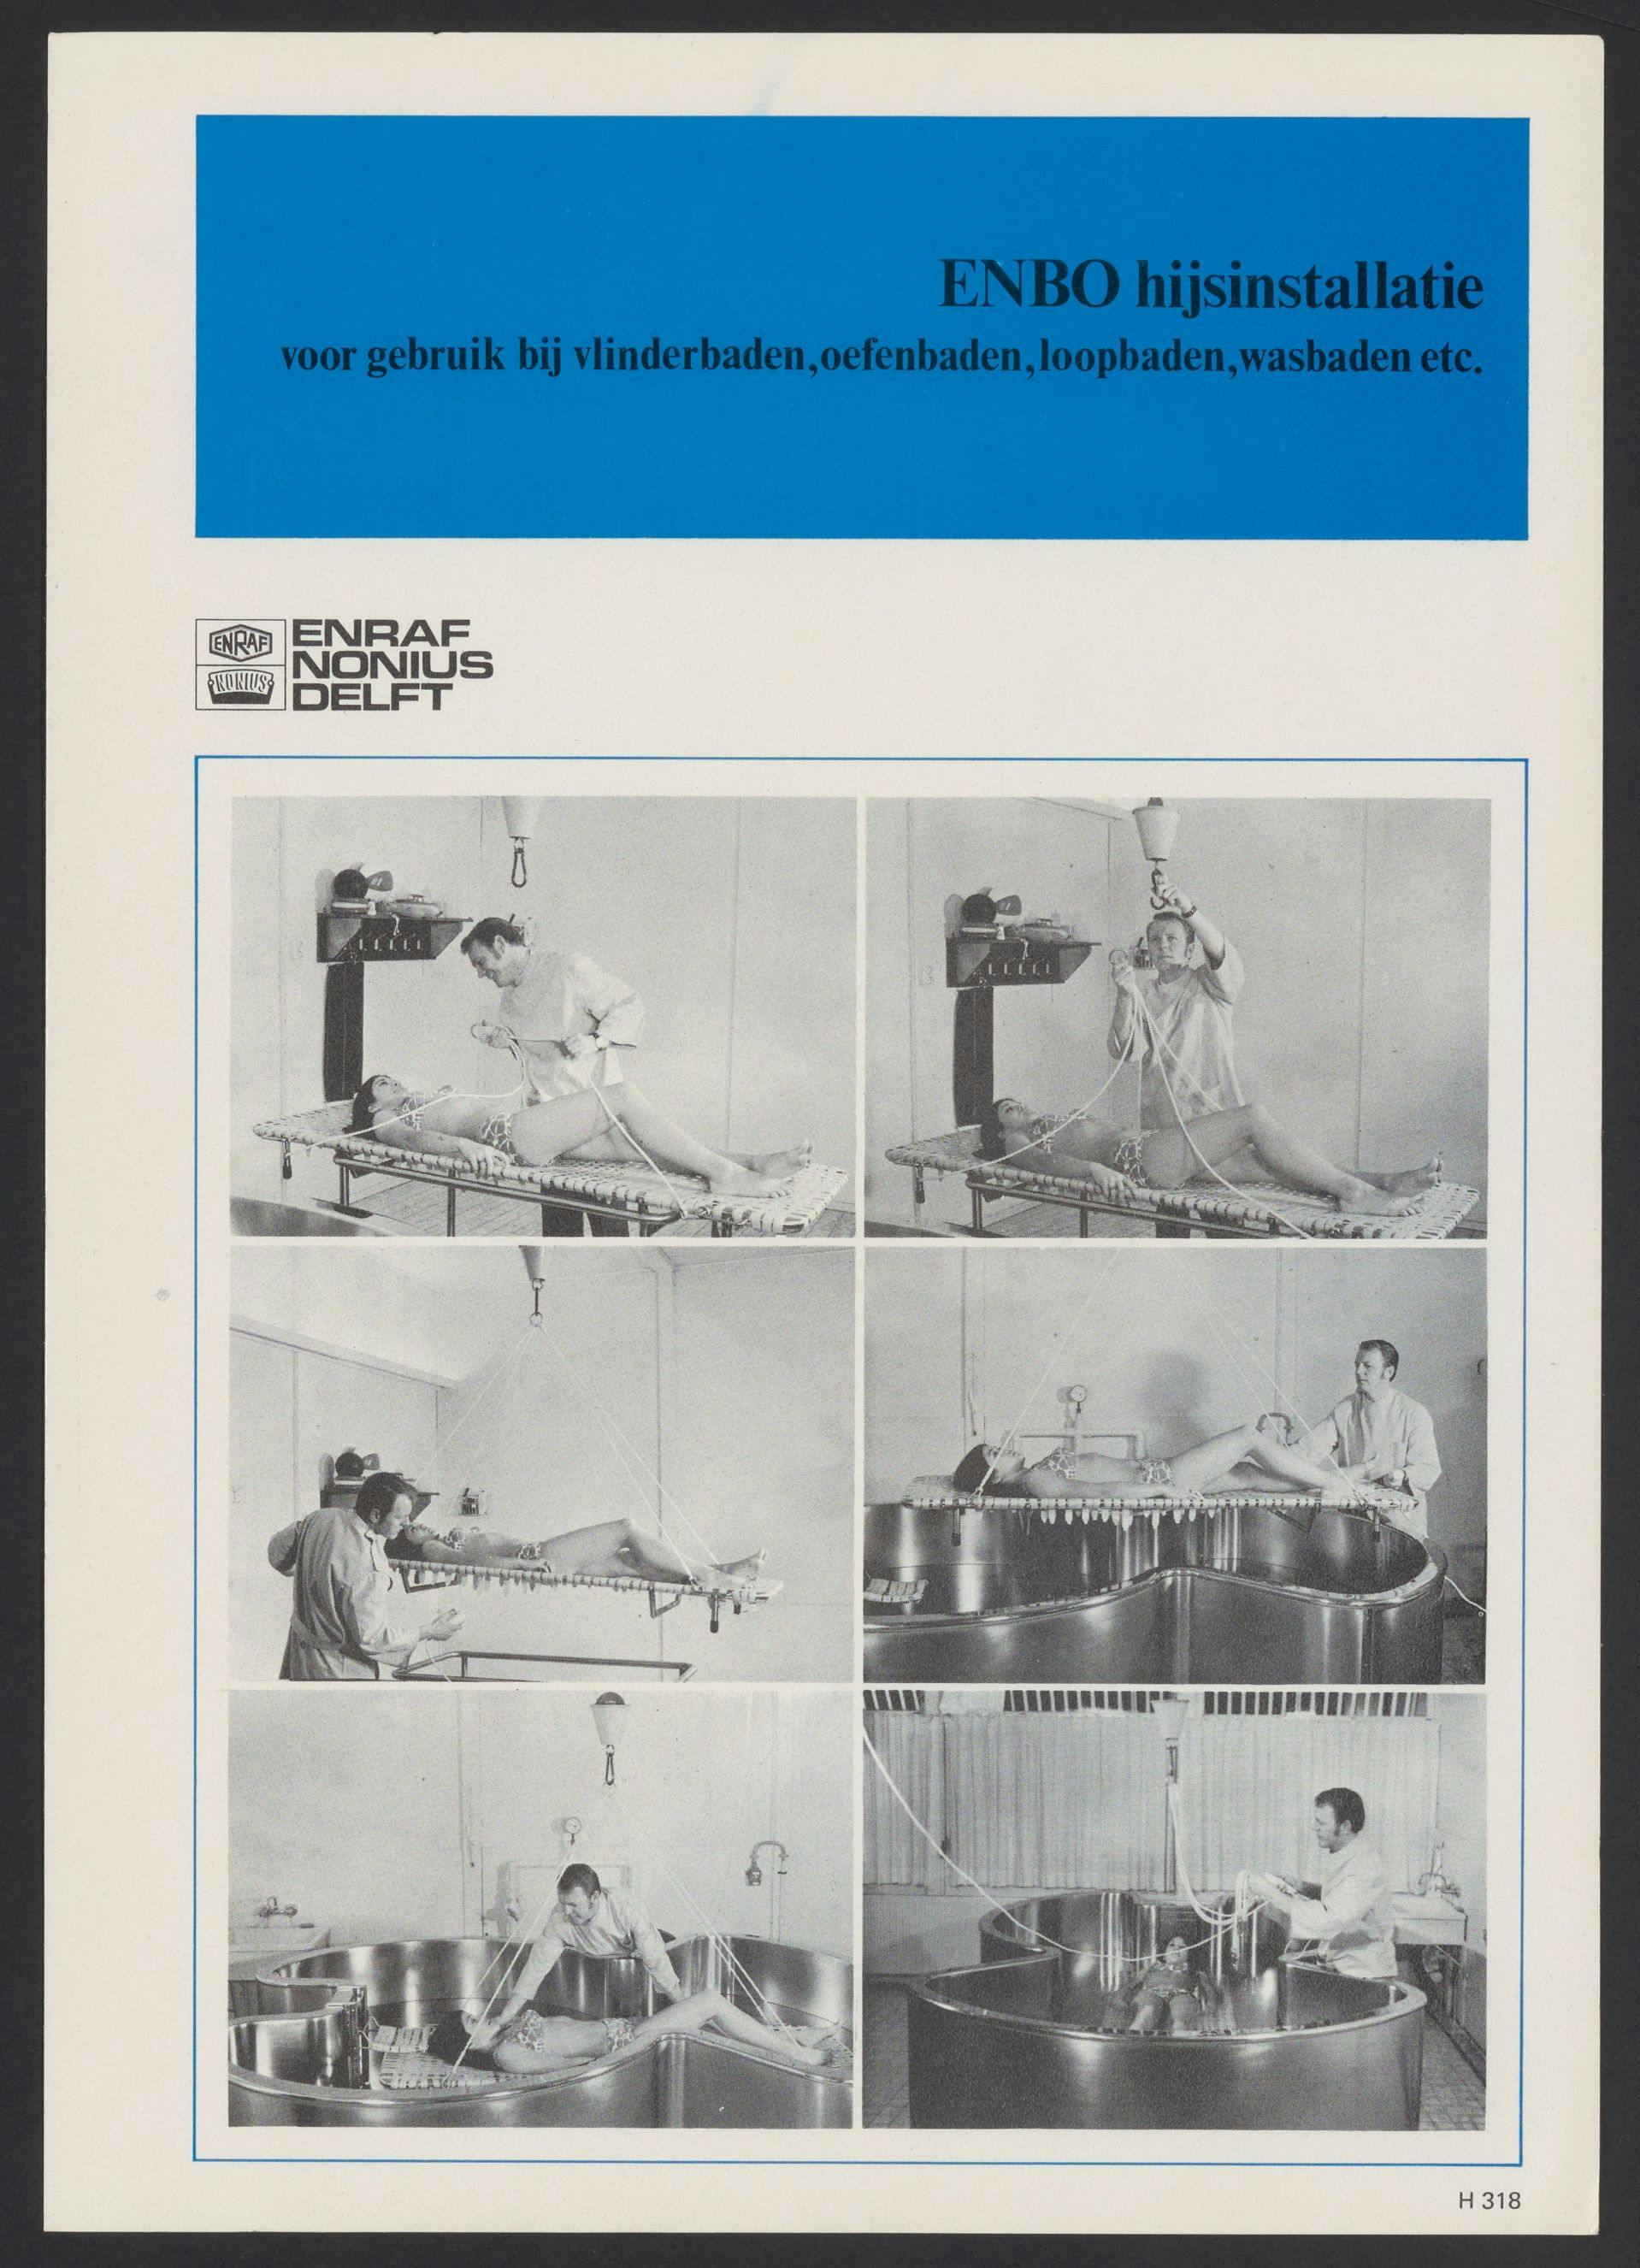 Six photographs in black and white, explaining step by step how the bathing equipment works. A white woman is being lifted in a large metal tub by a white man in a doctors uniform who operates the crane machine.